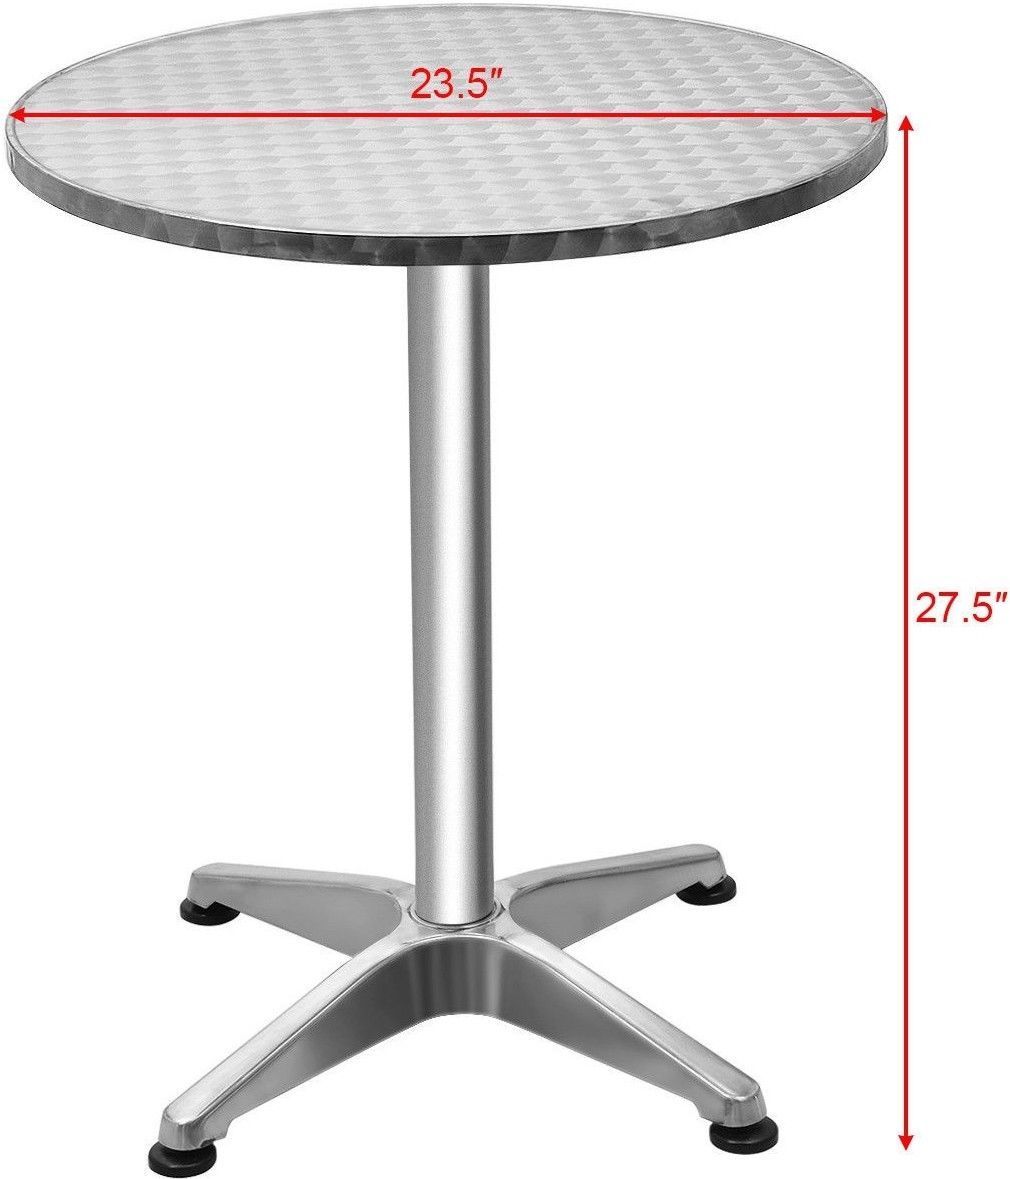 Small Round Cafe  Bistro  Table Stainless Steel Outdoor 